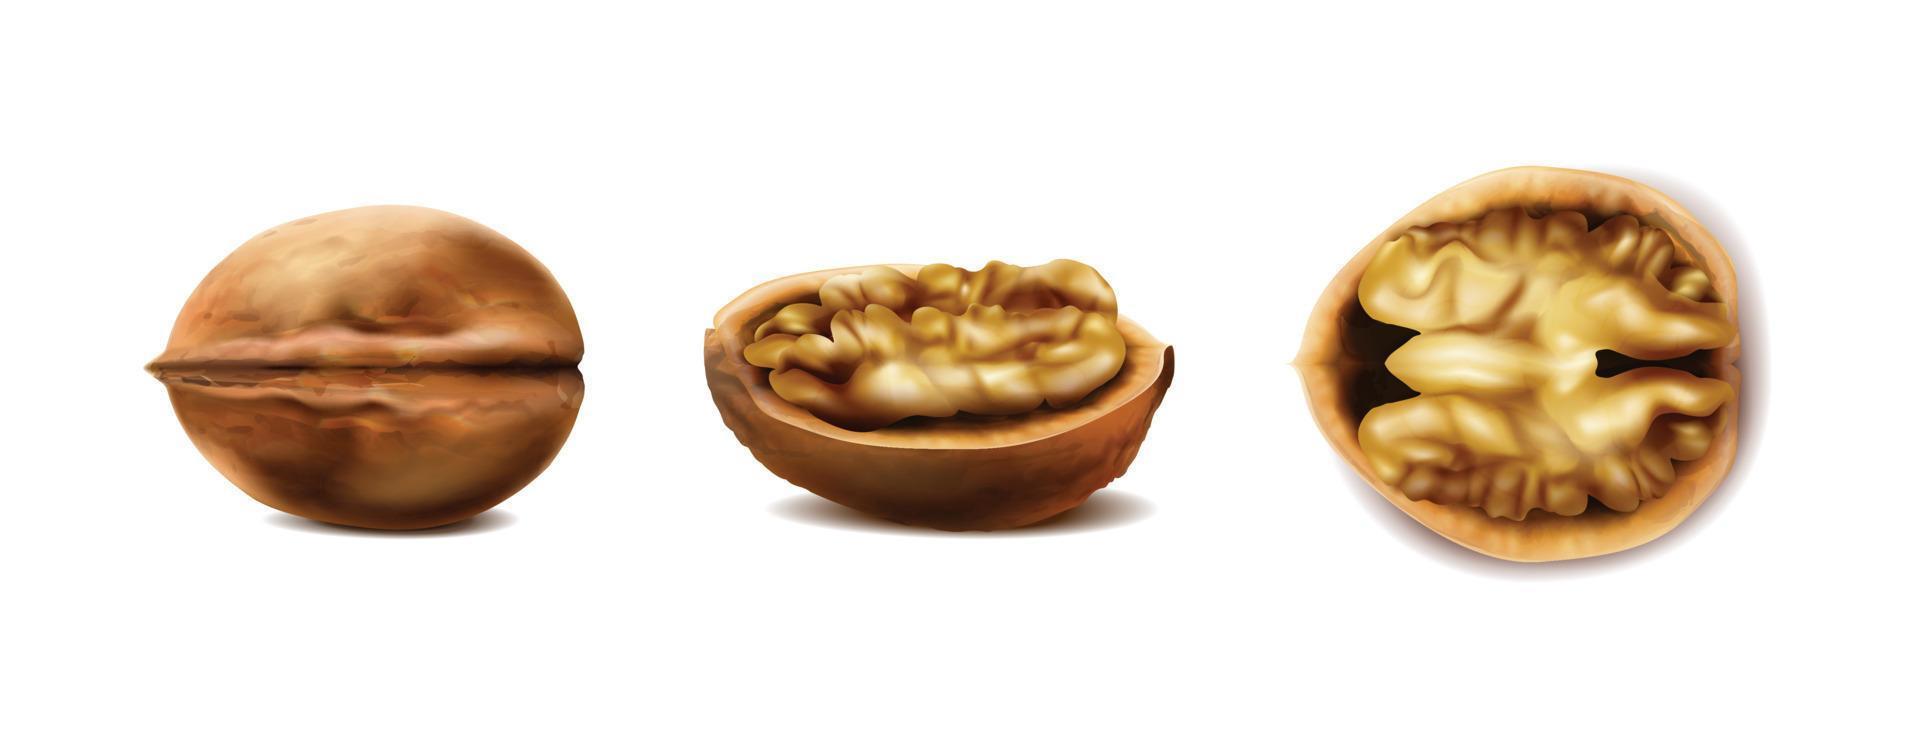 realistic vector icon. Walnuts in the shell in different shapes, whole, cut in half in side and front view. Isolated on white.